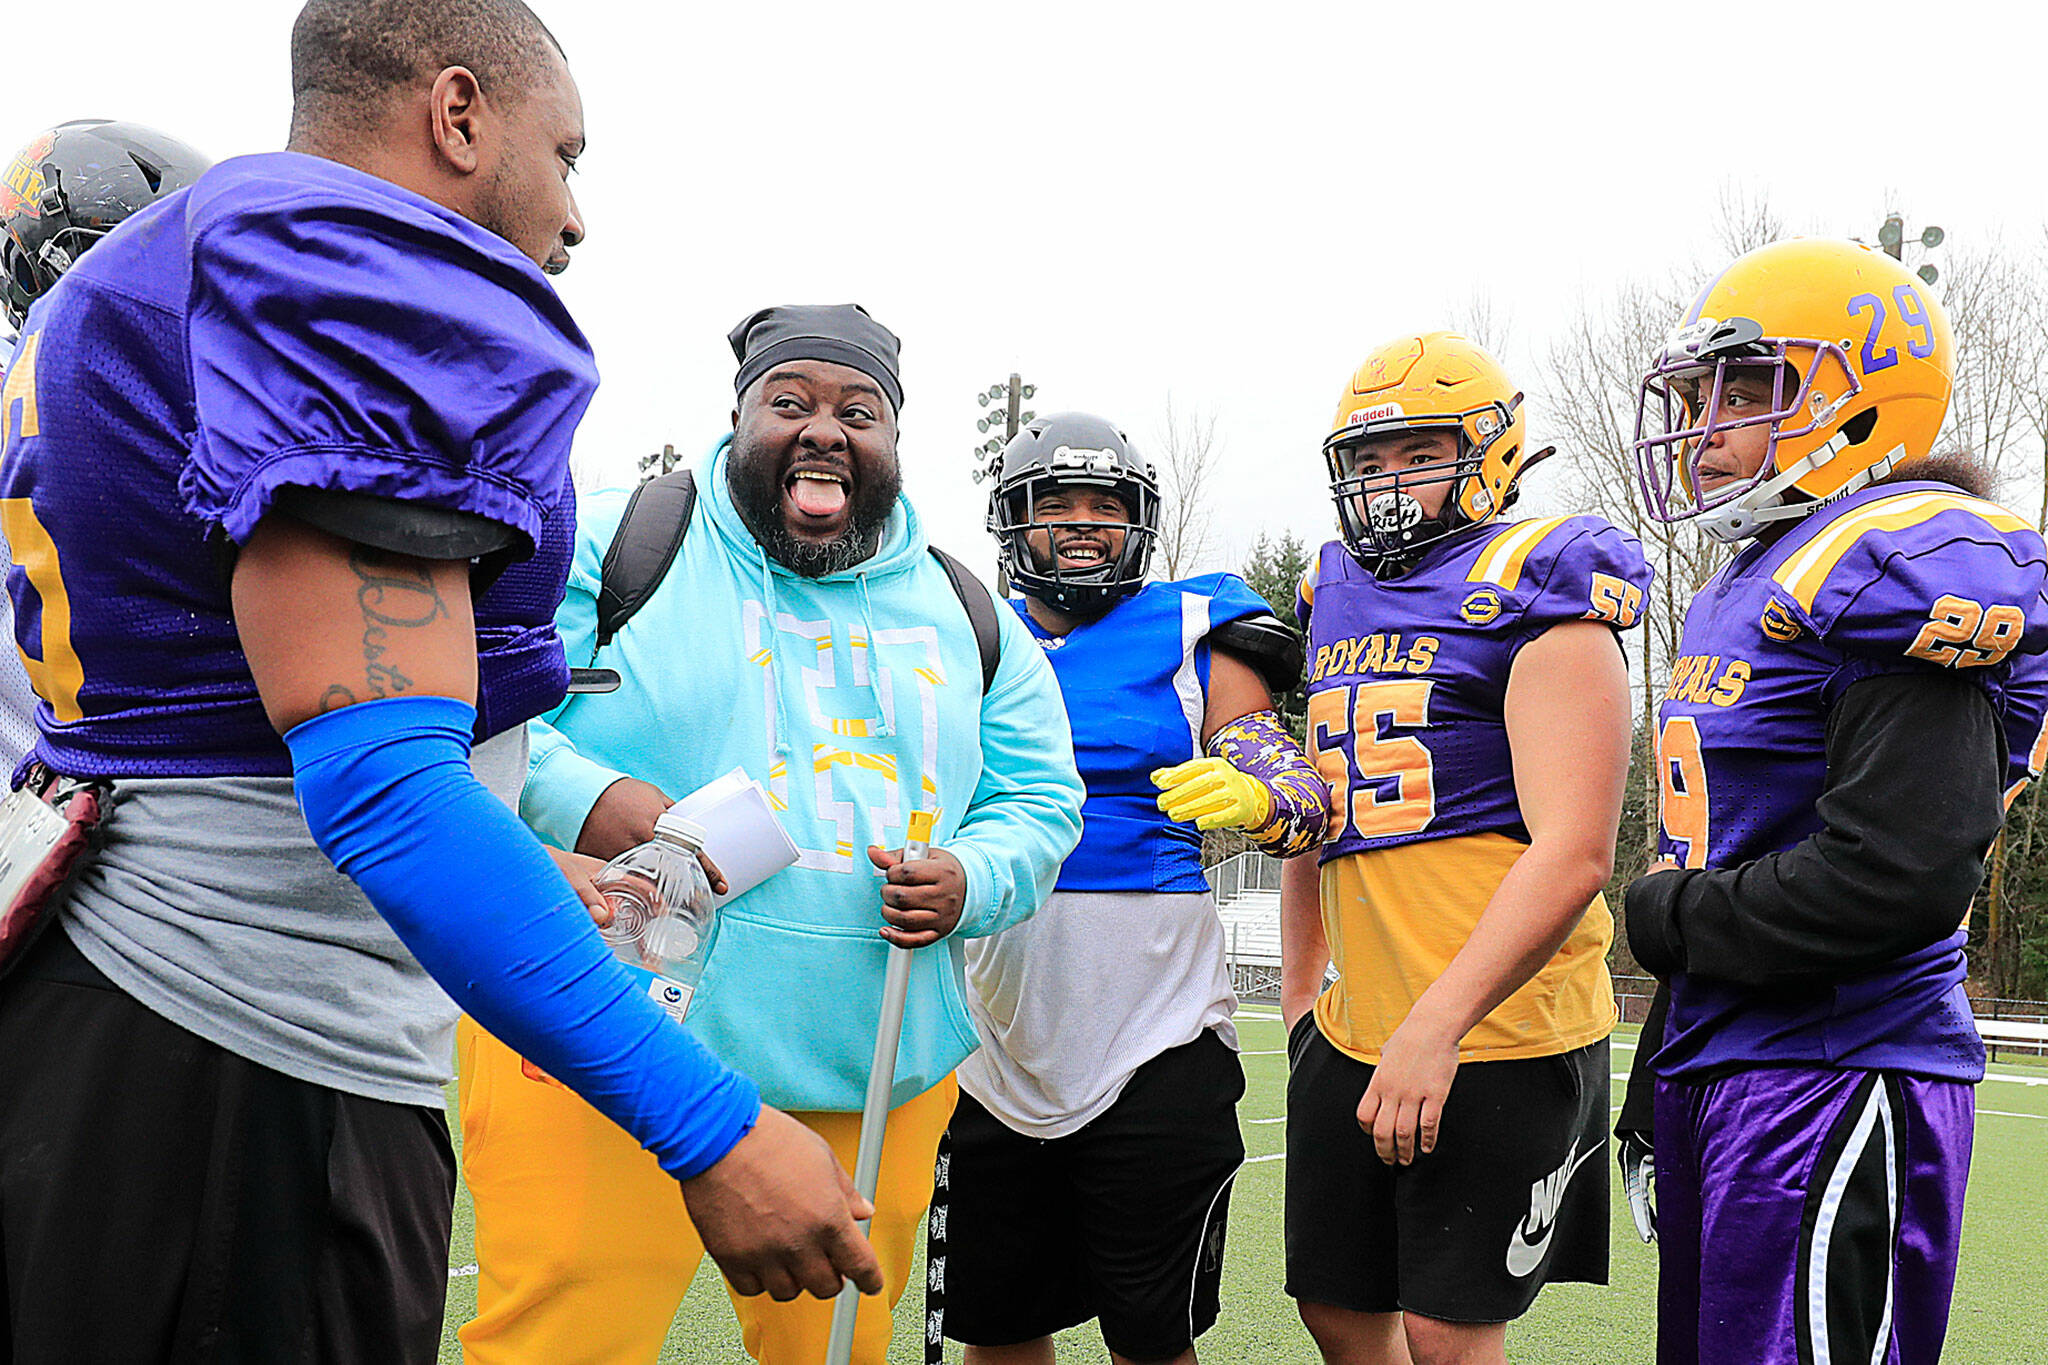 Boyd Demus, Everett Royals defensive coordinator, leads the huddle with a laugh at Archbishop Murphy High School. (Kevin Clark / The Herald)